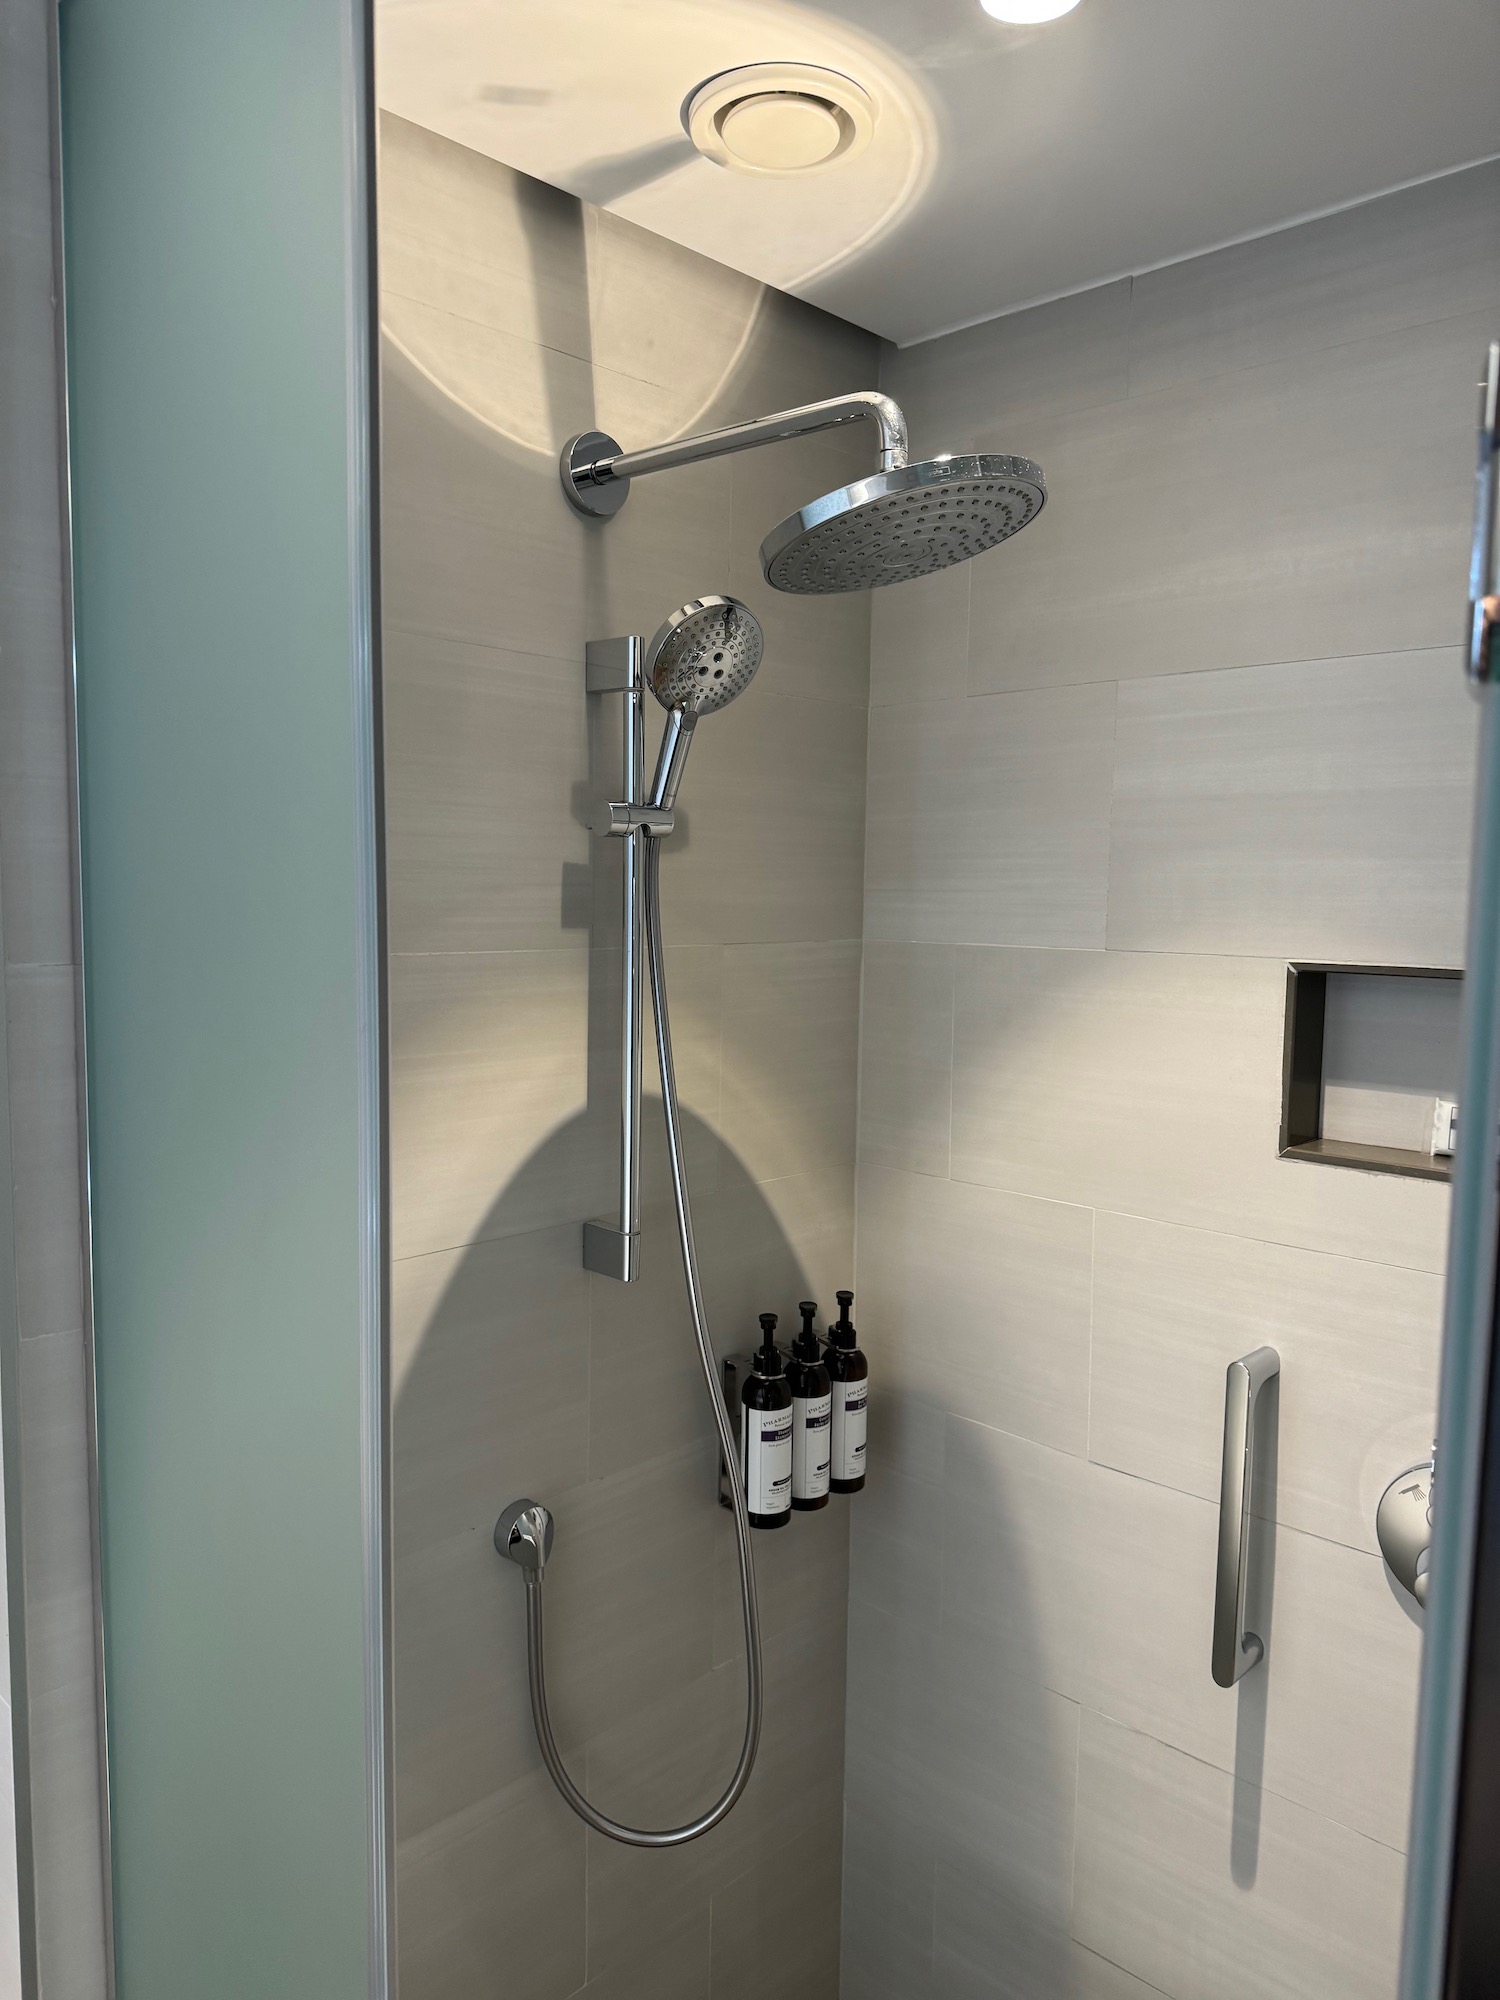 a shower with a shower head and bottles of wine